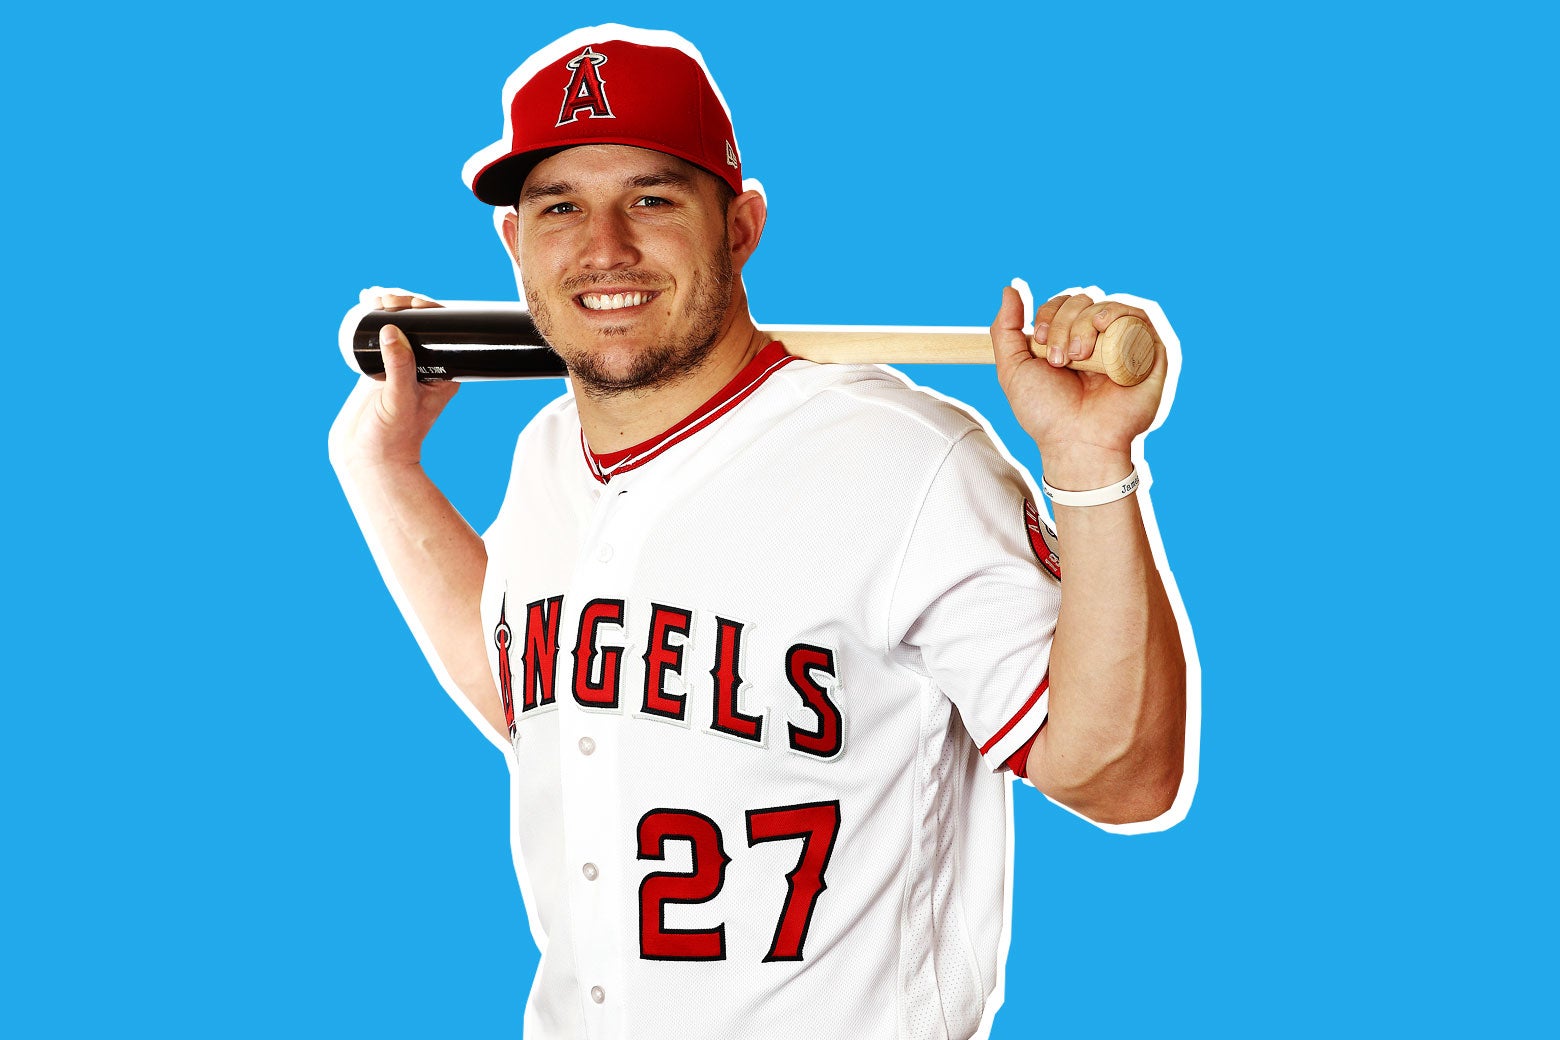 Photo illustration of Mike Trout, No. 27 for the Los Angeles Angels, posing with a baseball bat slung over the back of his shoulders while he smiles winningly at the camera.